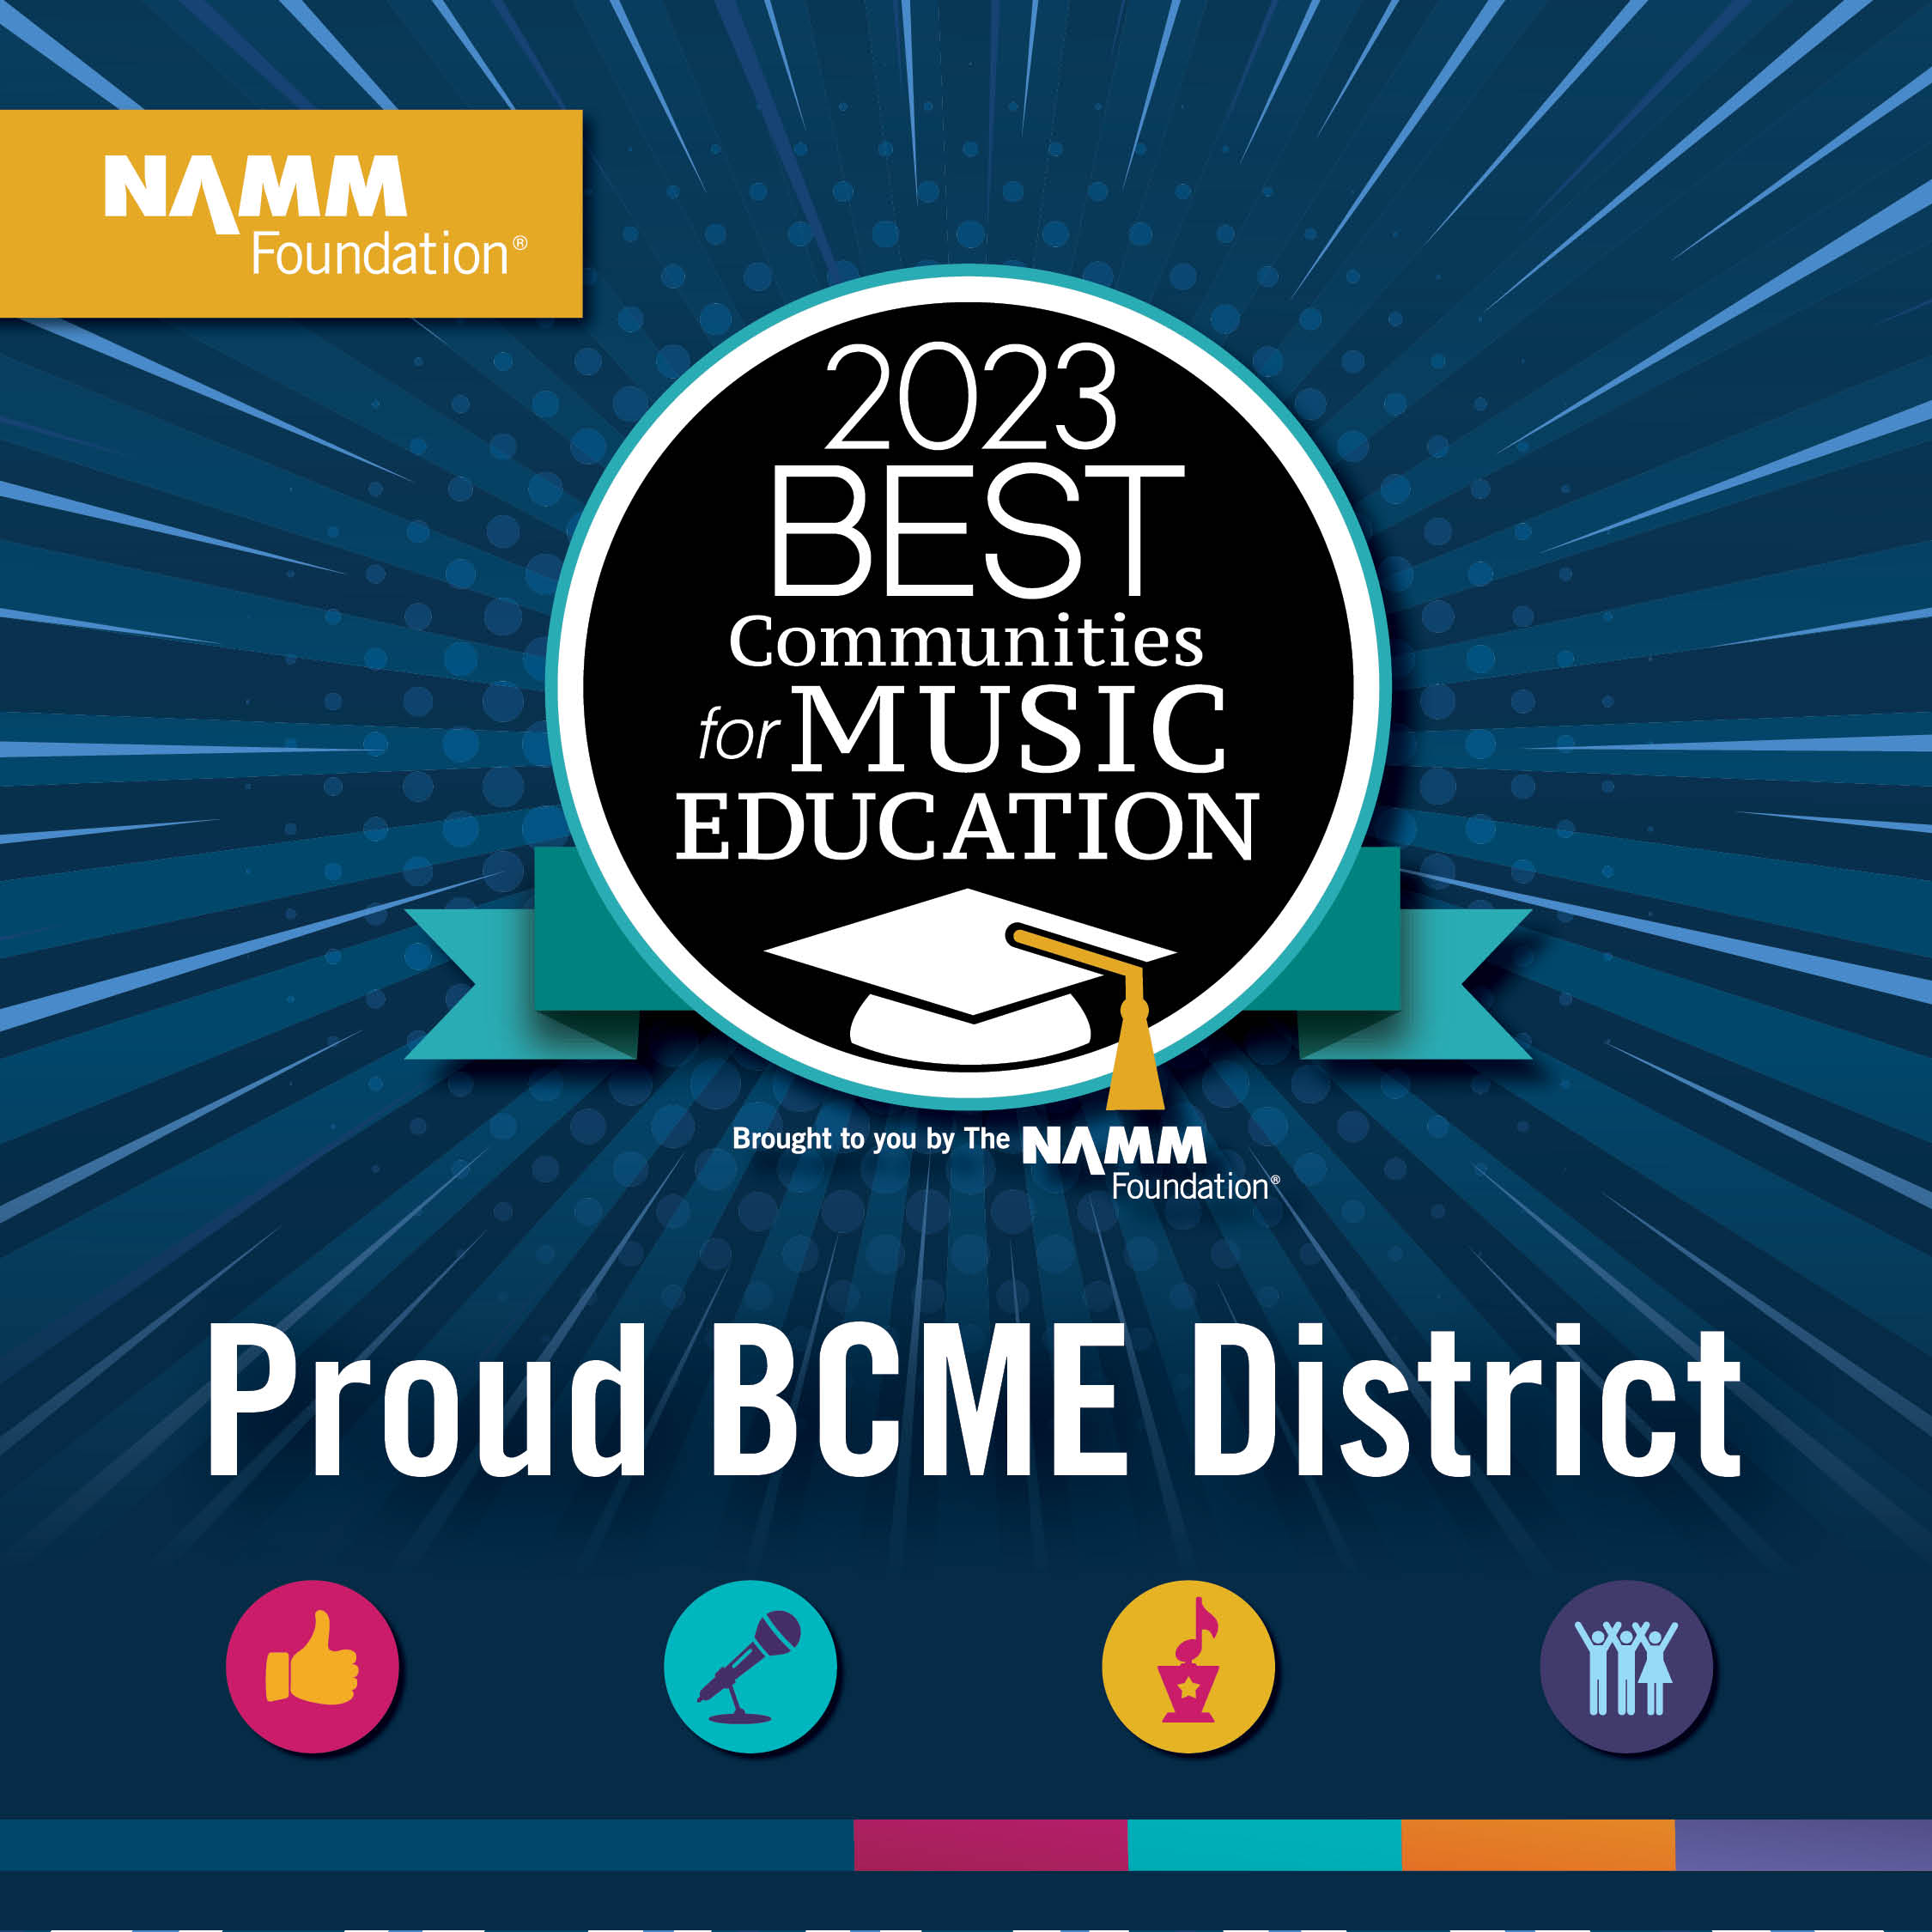 JE receives the NAMM award for being one of the "Best Communities for Music Education"